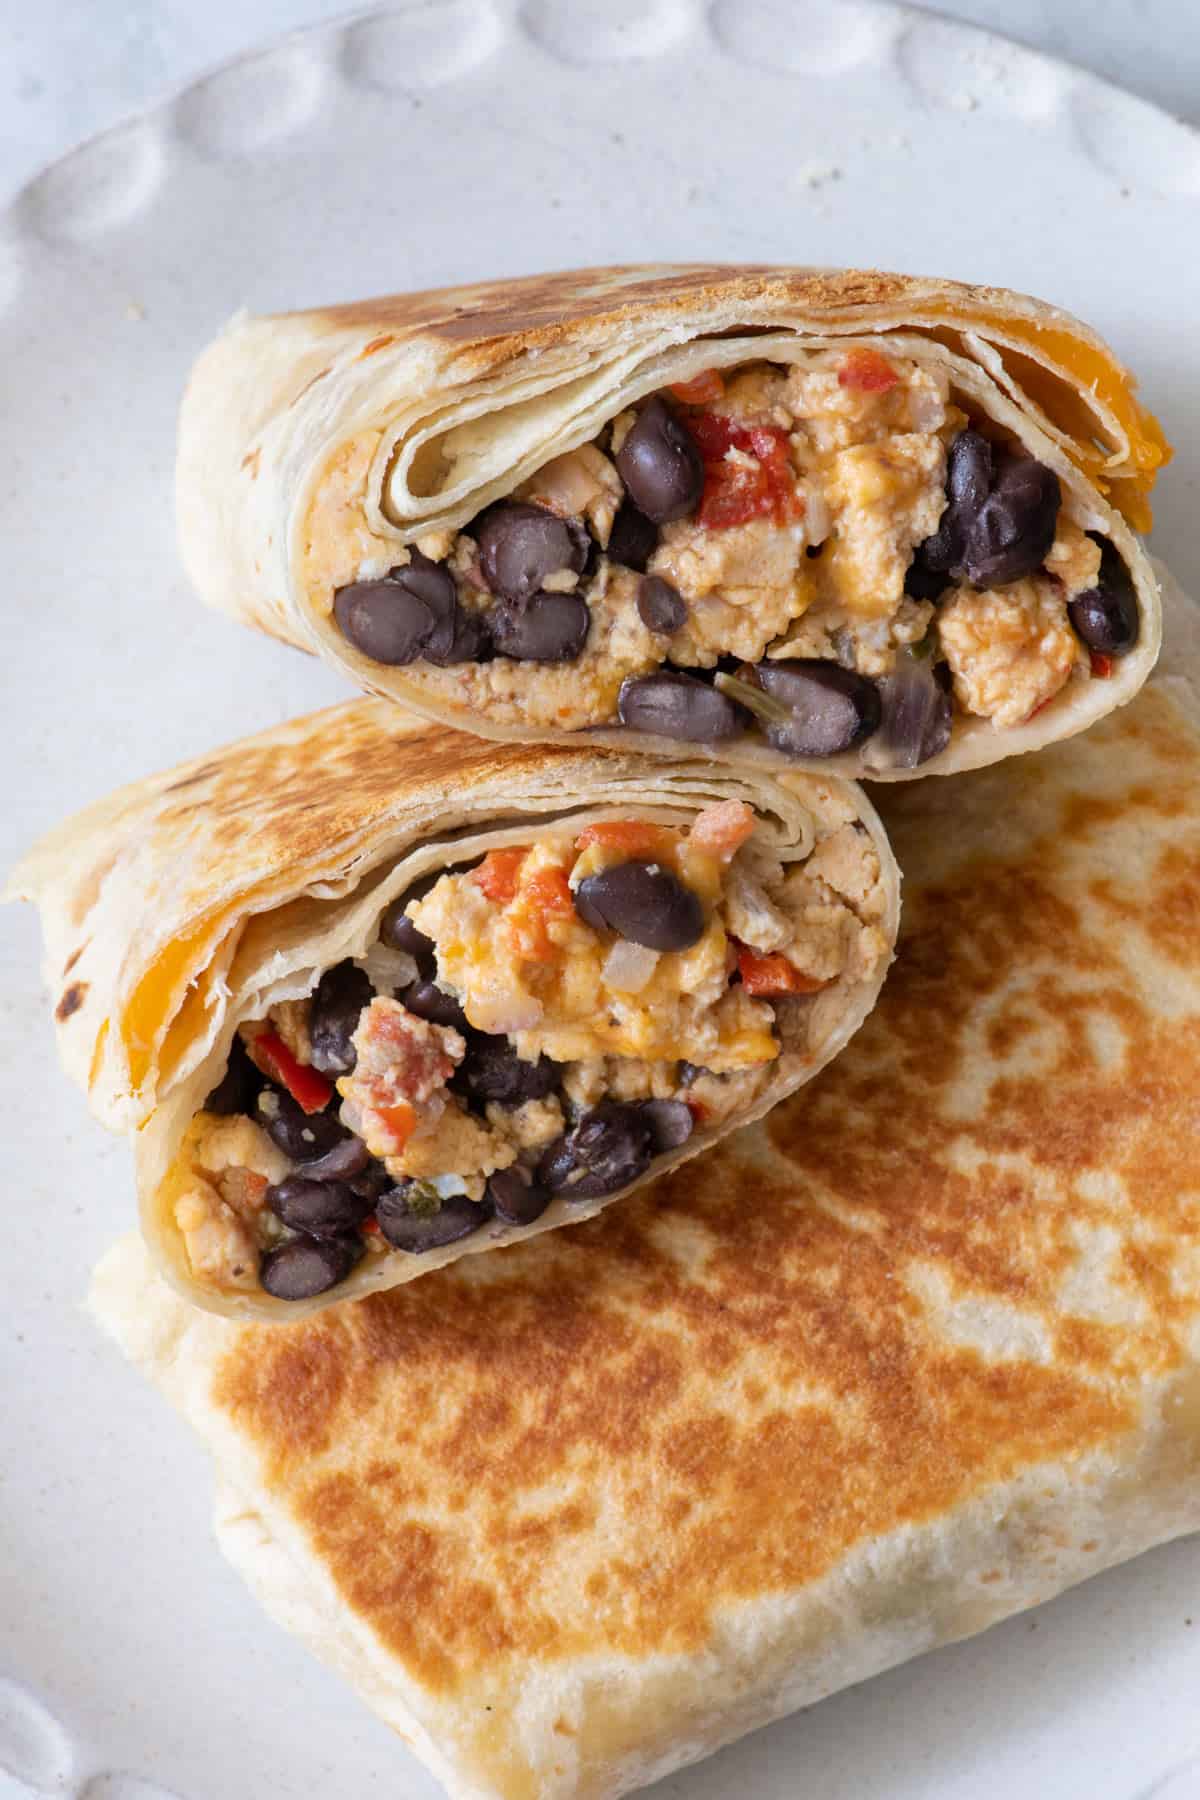 1 burrito cut in half and stacked on top of an uncut one.